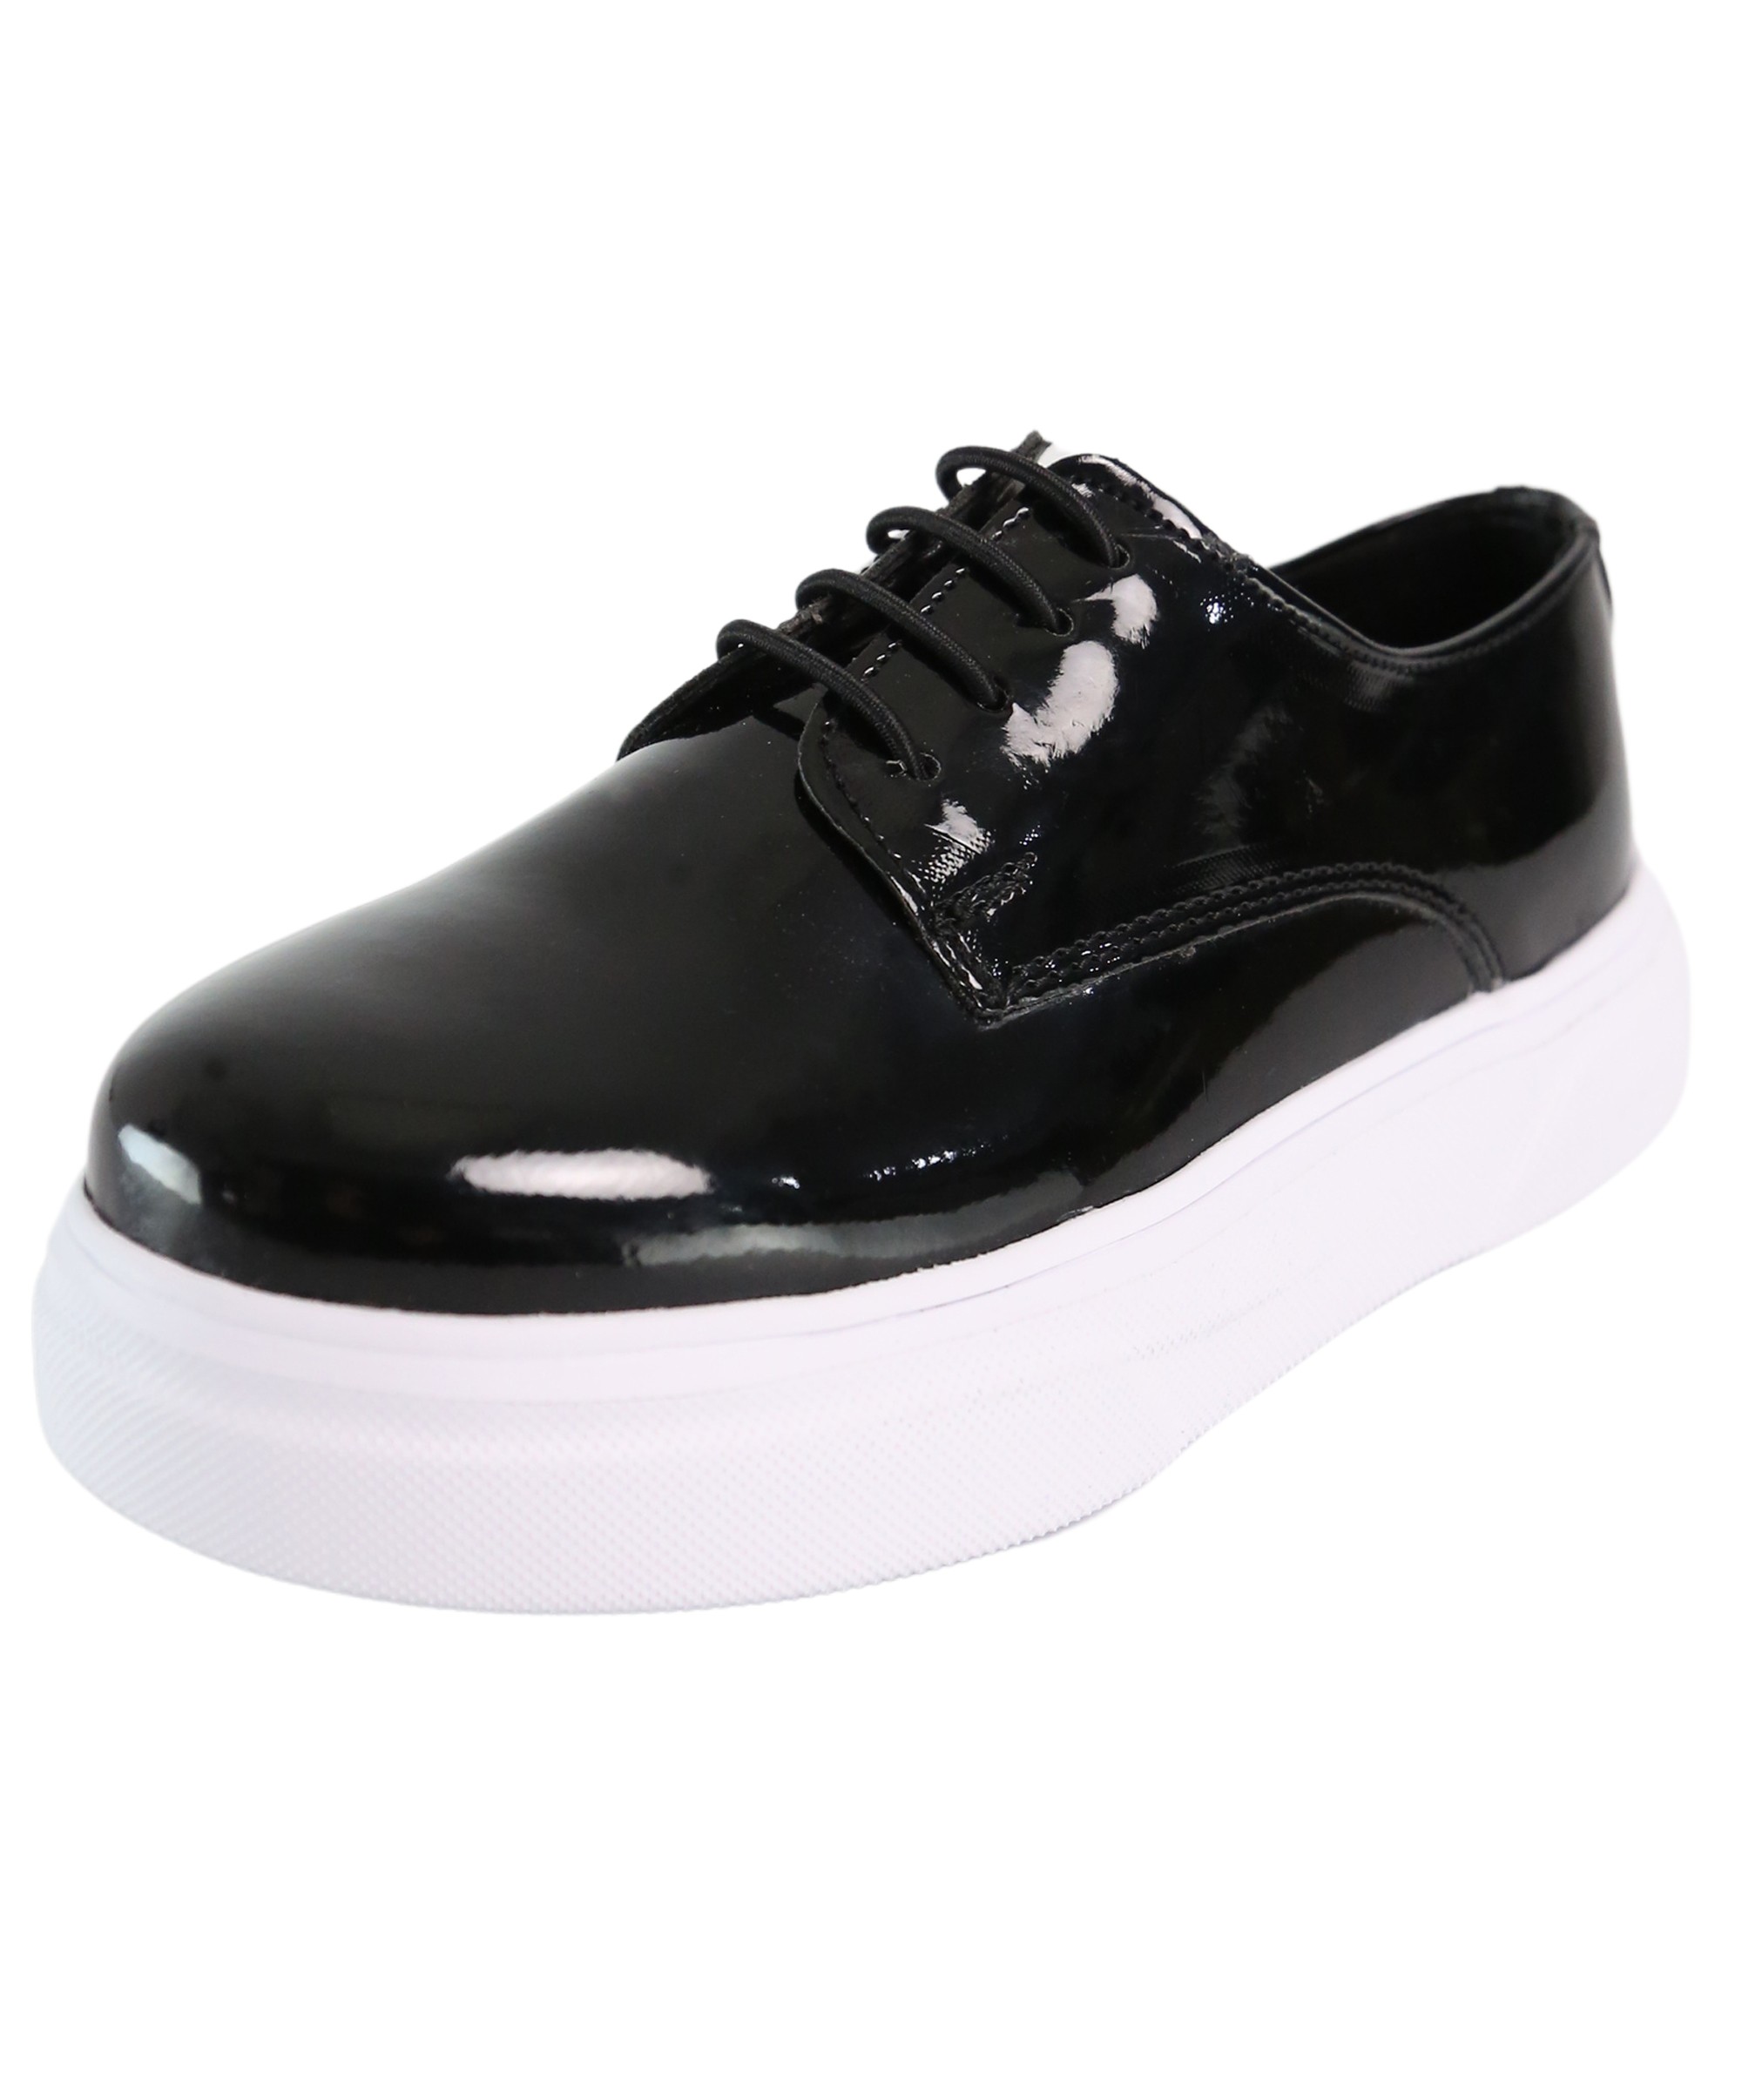 Boys Patent Black Lace-up Sneaker with White Thick Sole